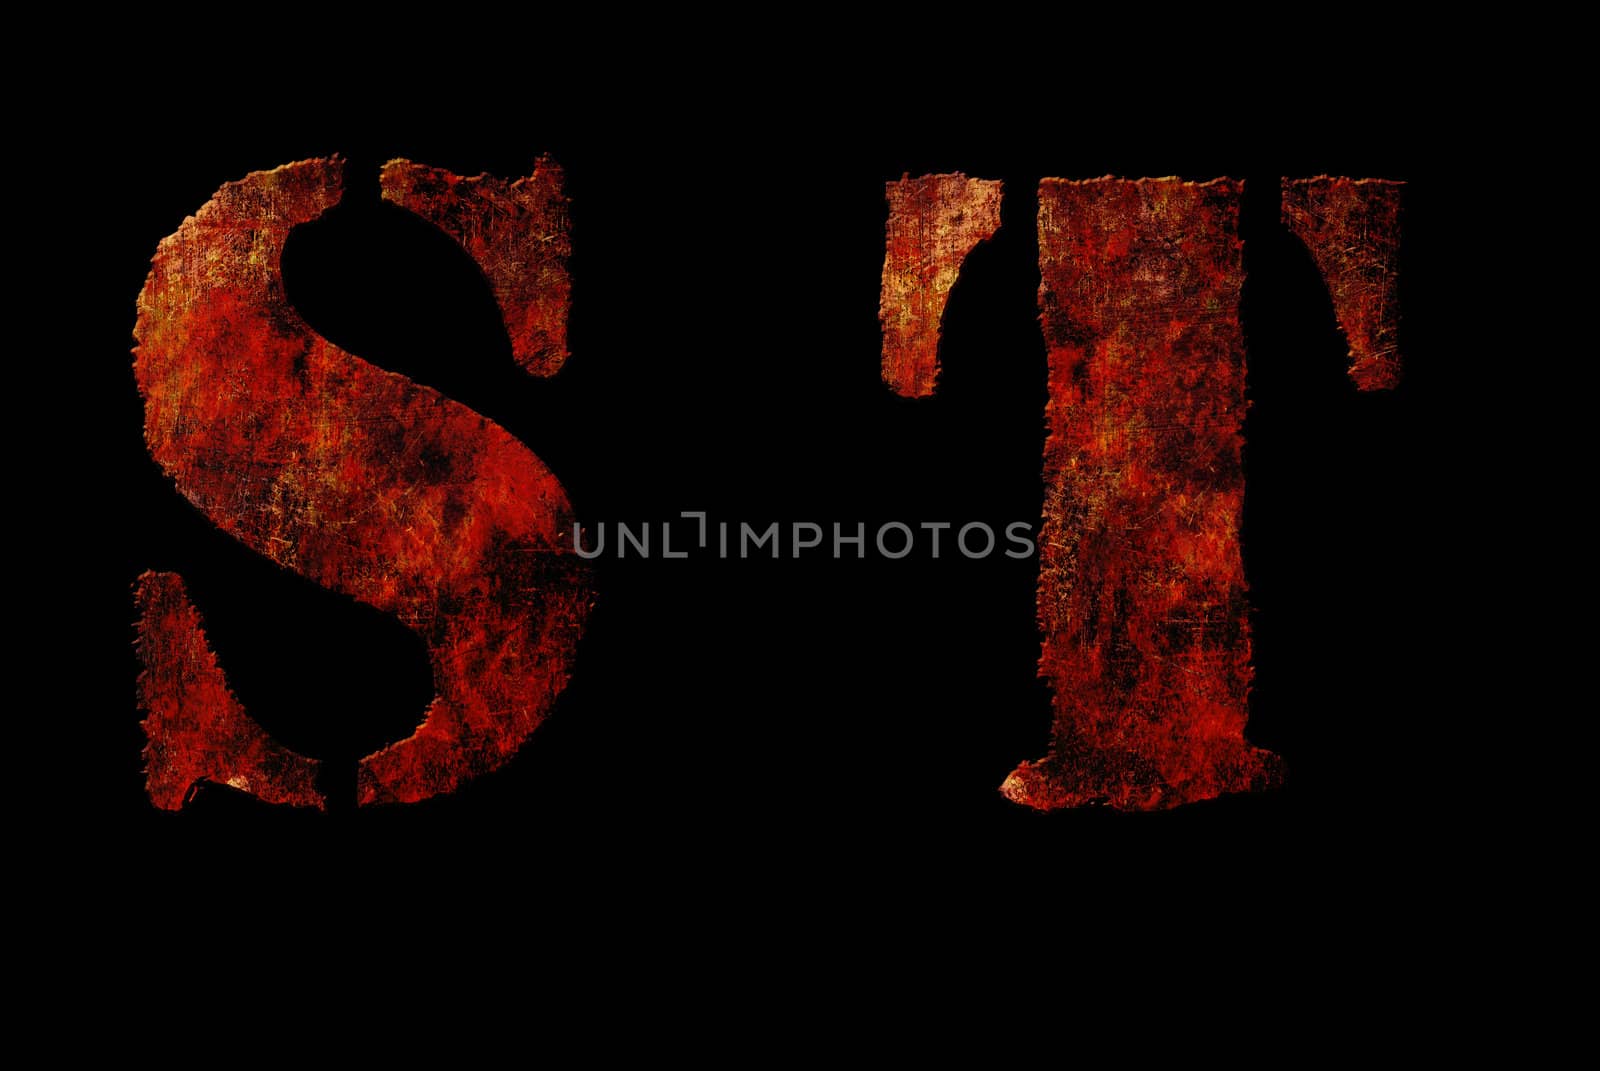 Rusty vintage alphabet "ST" letters, grunge vintage alphabet on black isolated background. Can be use for icon, logo, web design concepts.